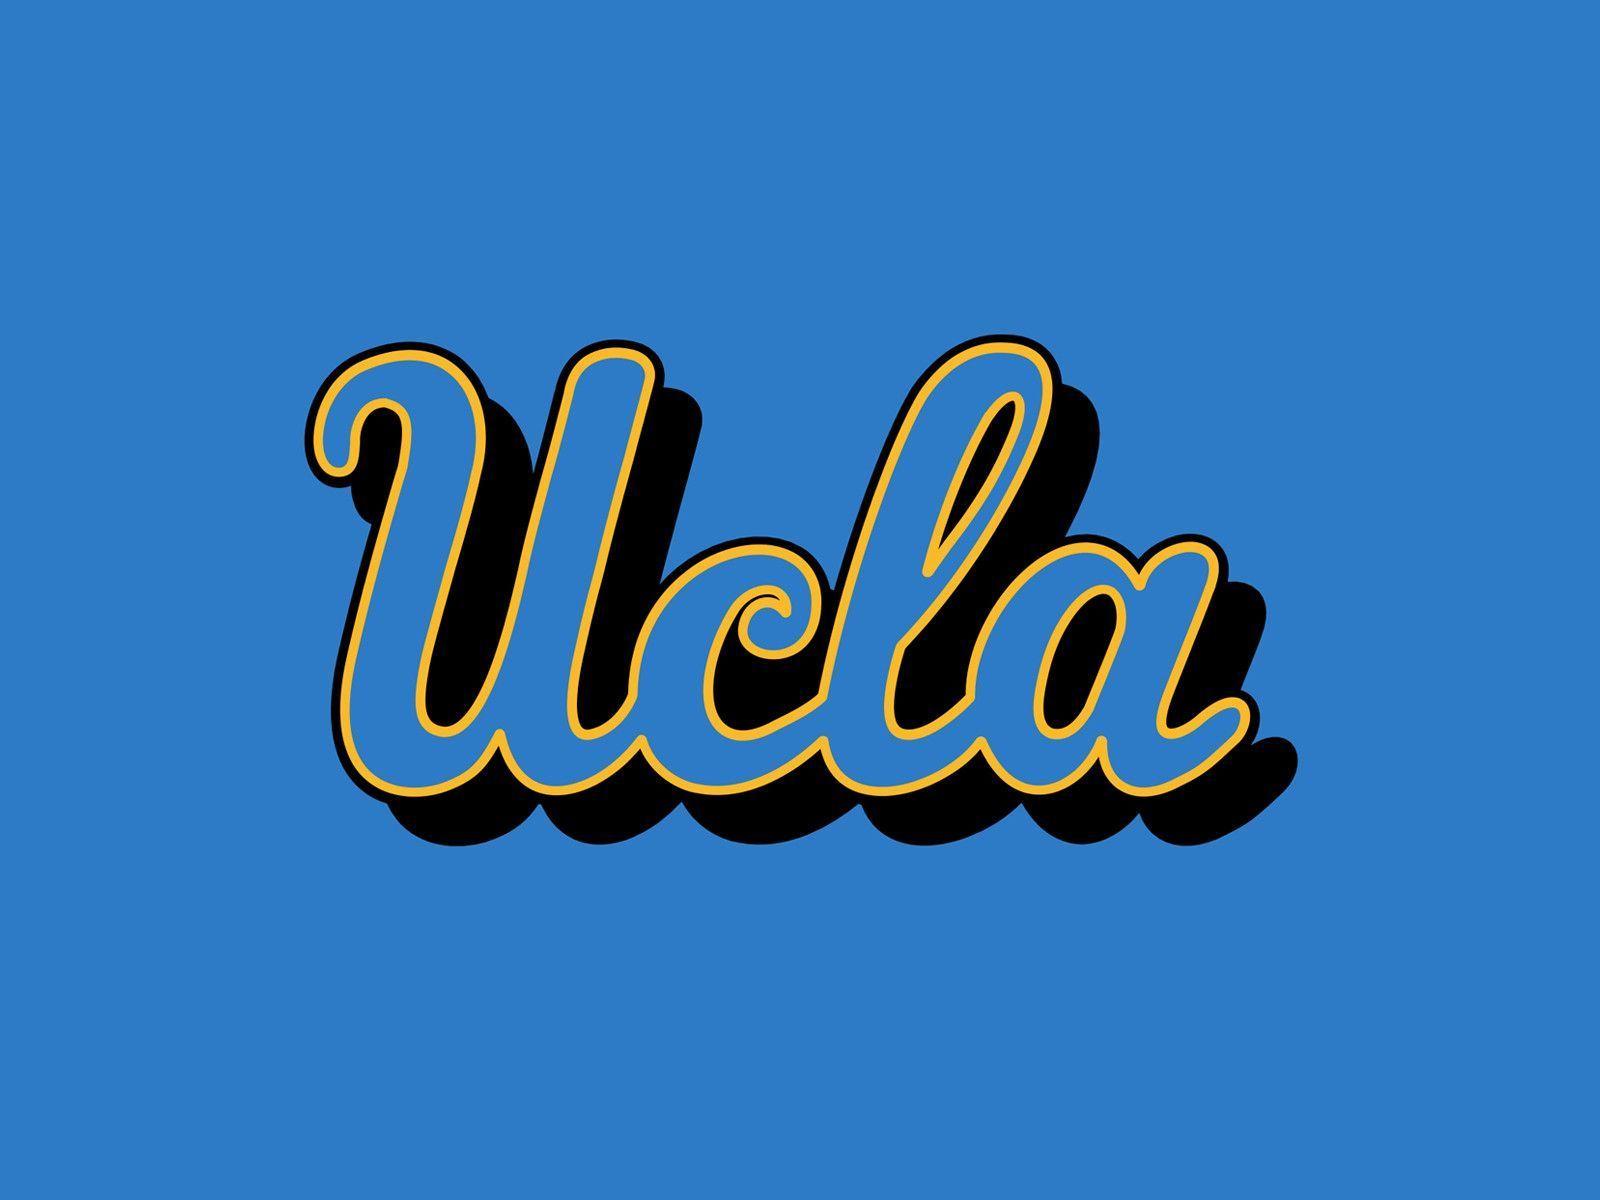 Ucla Wallpapers Top Free Ucla Backgrounds Wallpaperaccess